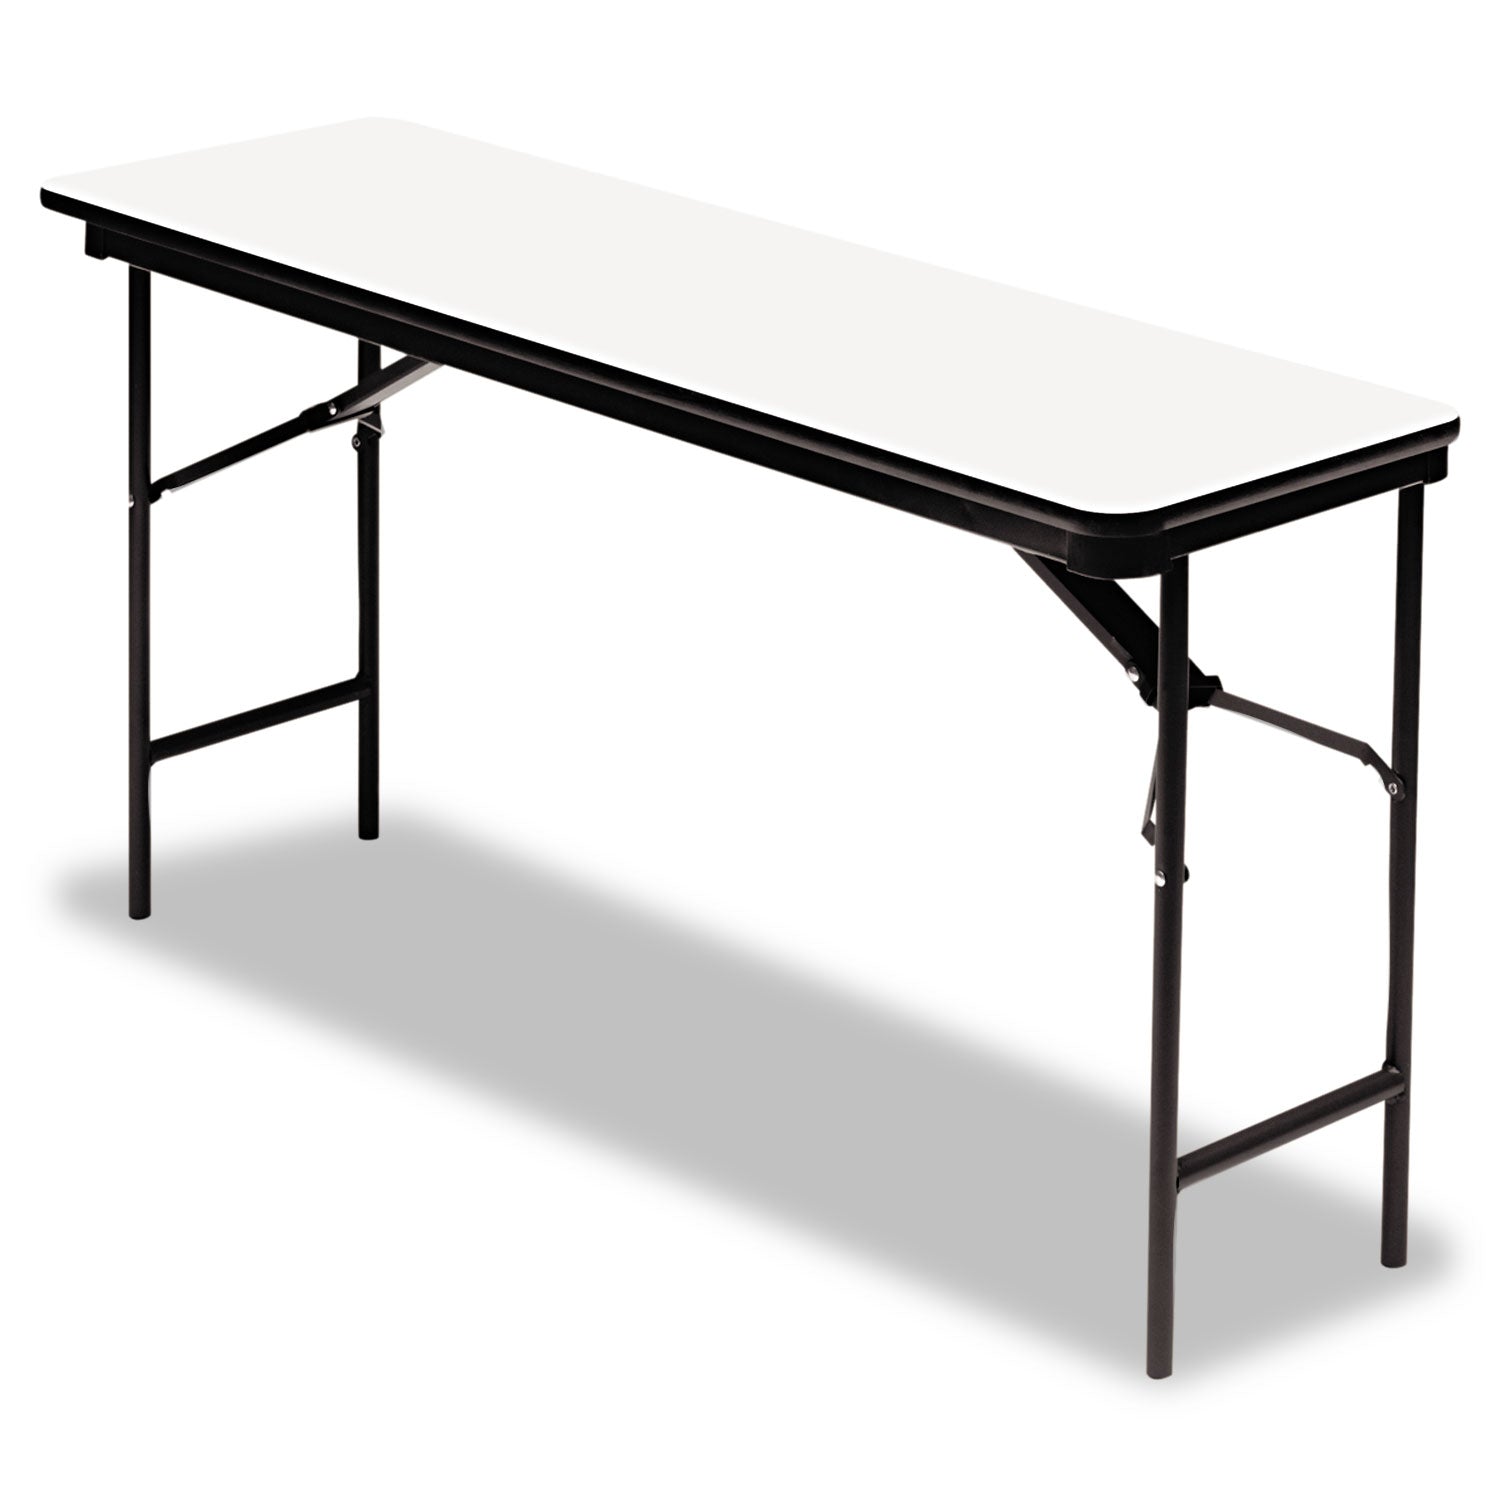 OfficeWorks Commercial Wood-Laminate Folding Table, Rectangular, 72" x 18" x 29", Gray Top, Charcoal Base - 